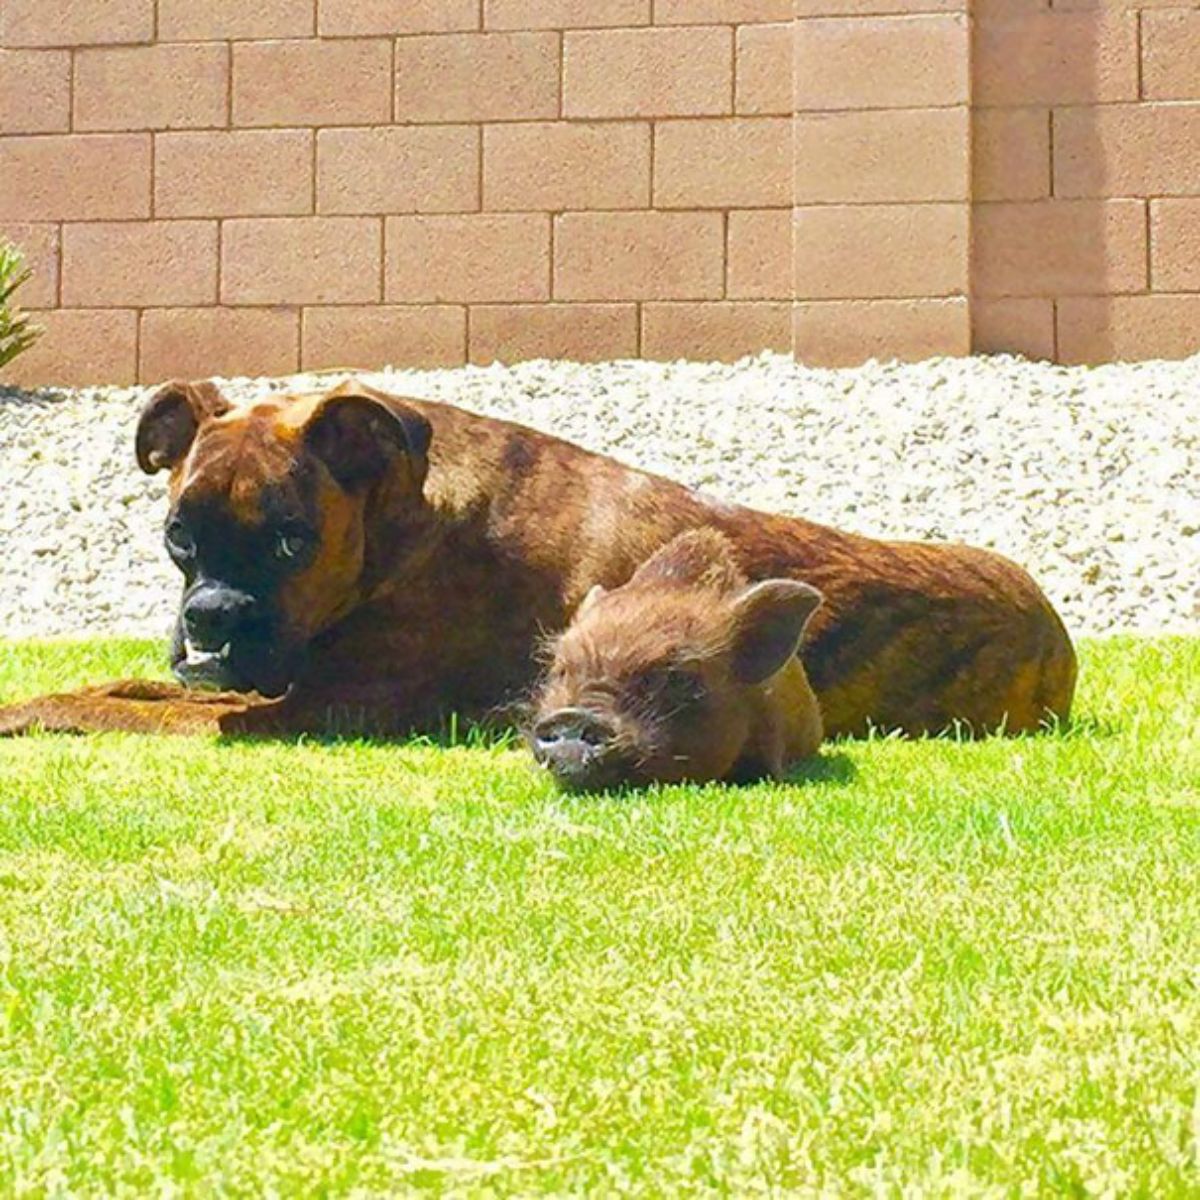 brown dog and piglet lying on the grass together